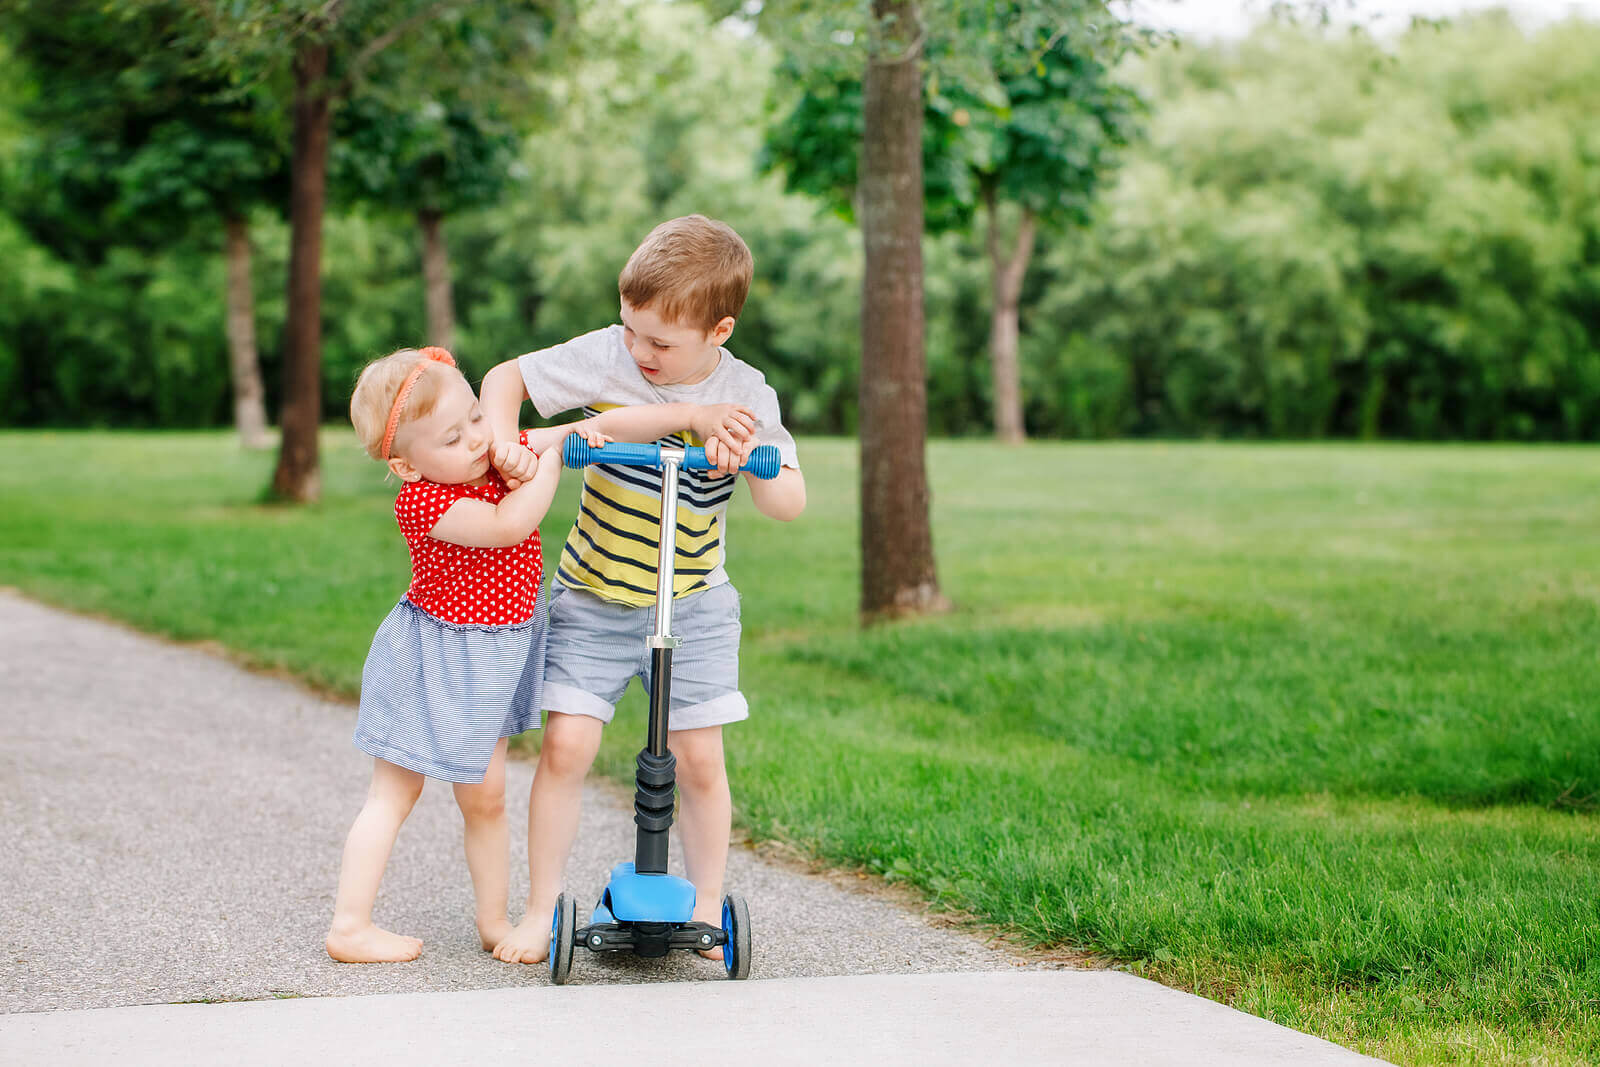 A boy and his little sister fighting over a scooter.